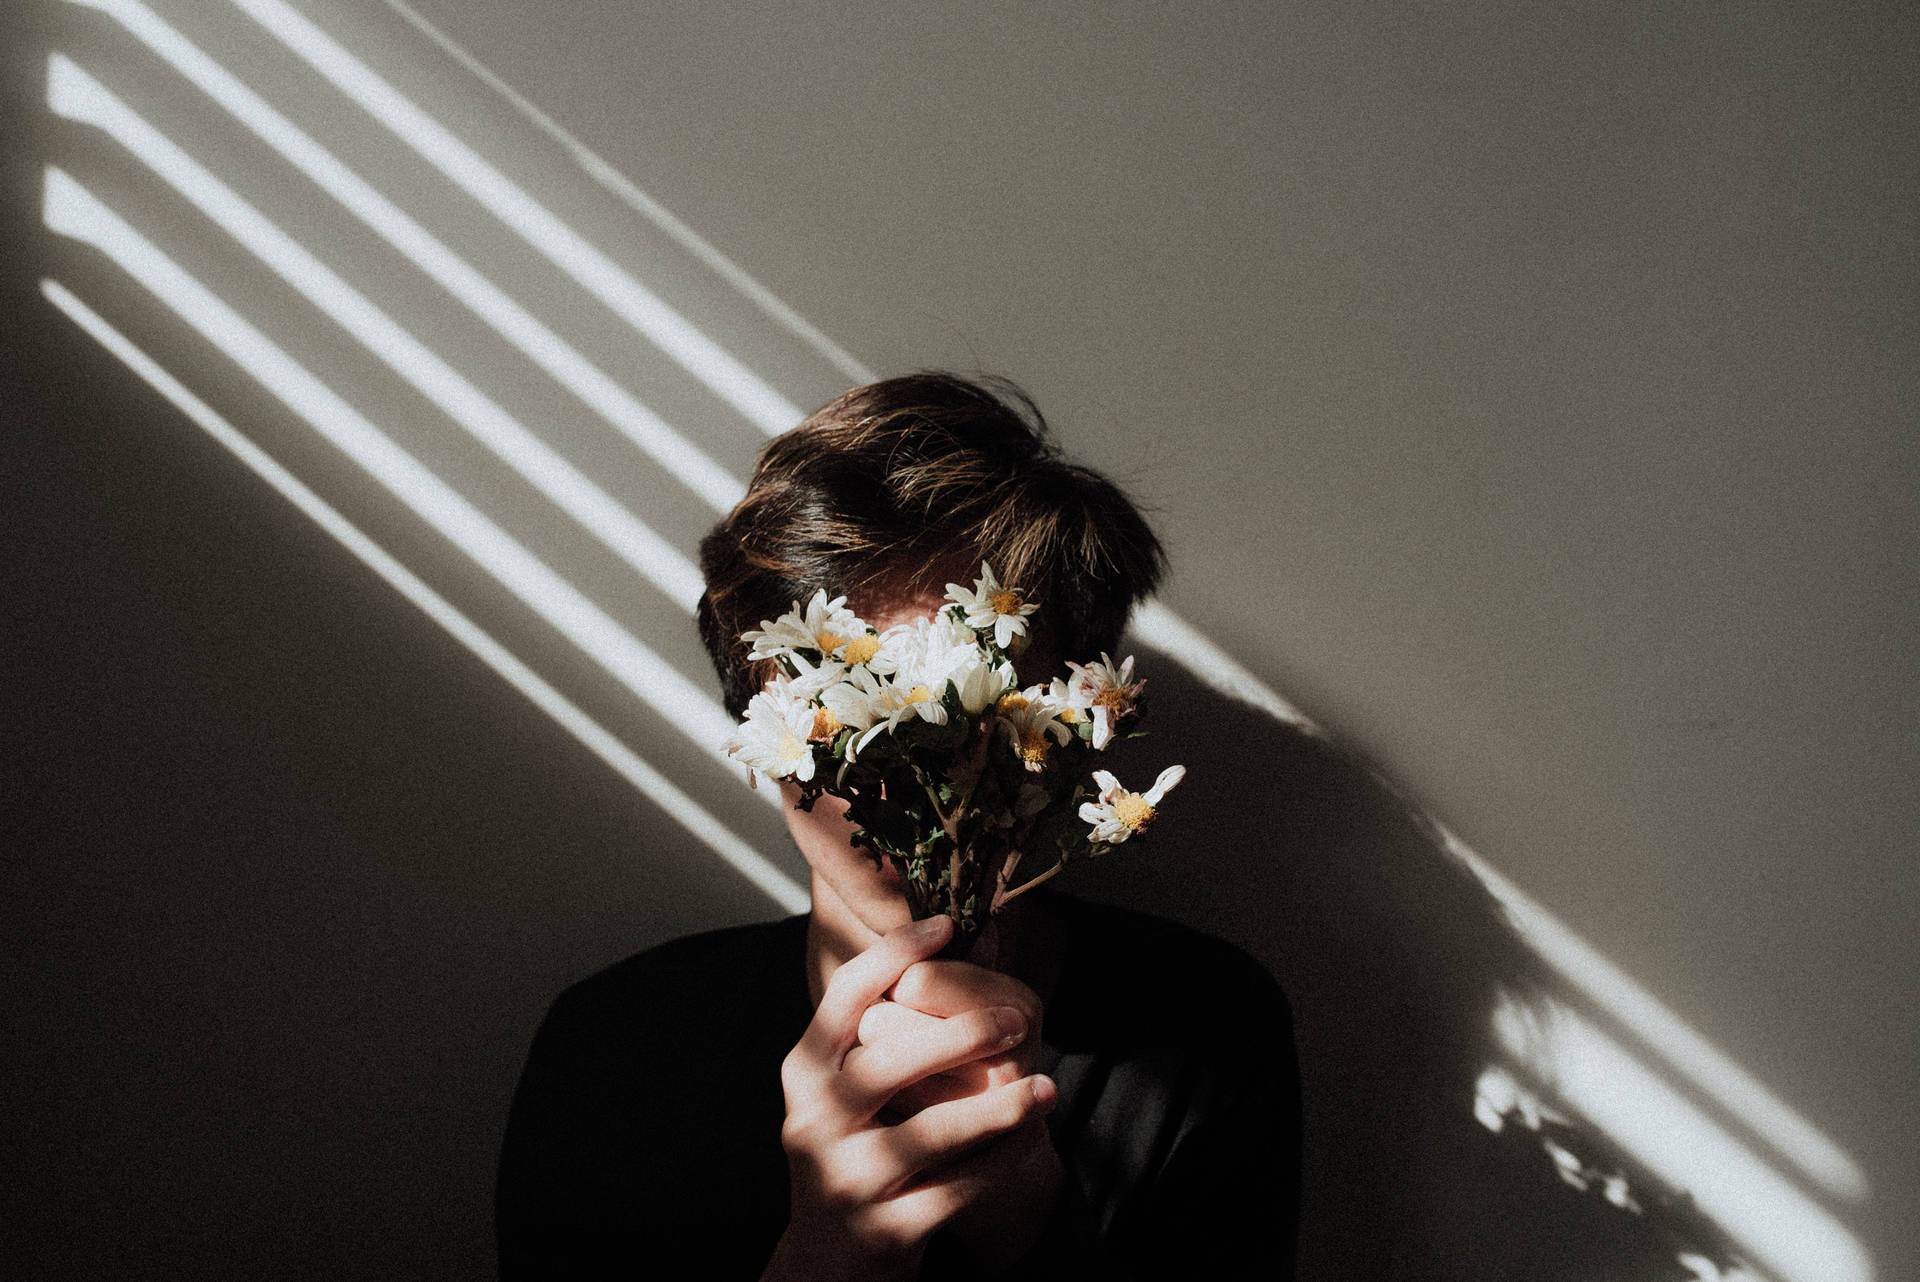 Man Holding Flowers Aesthetic Picture